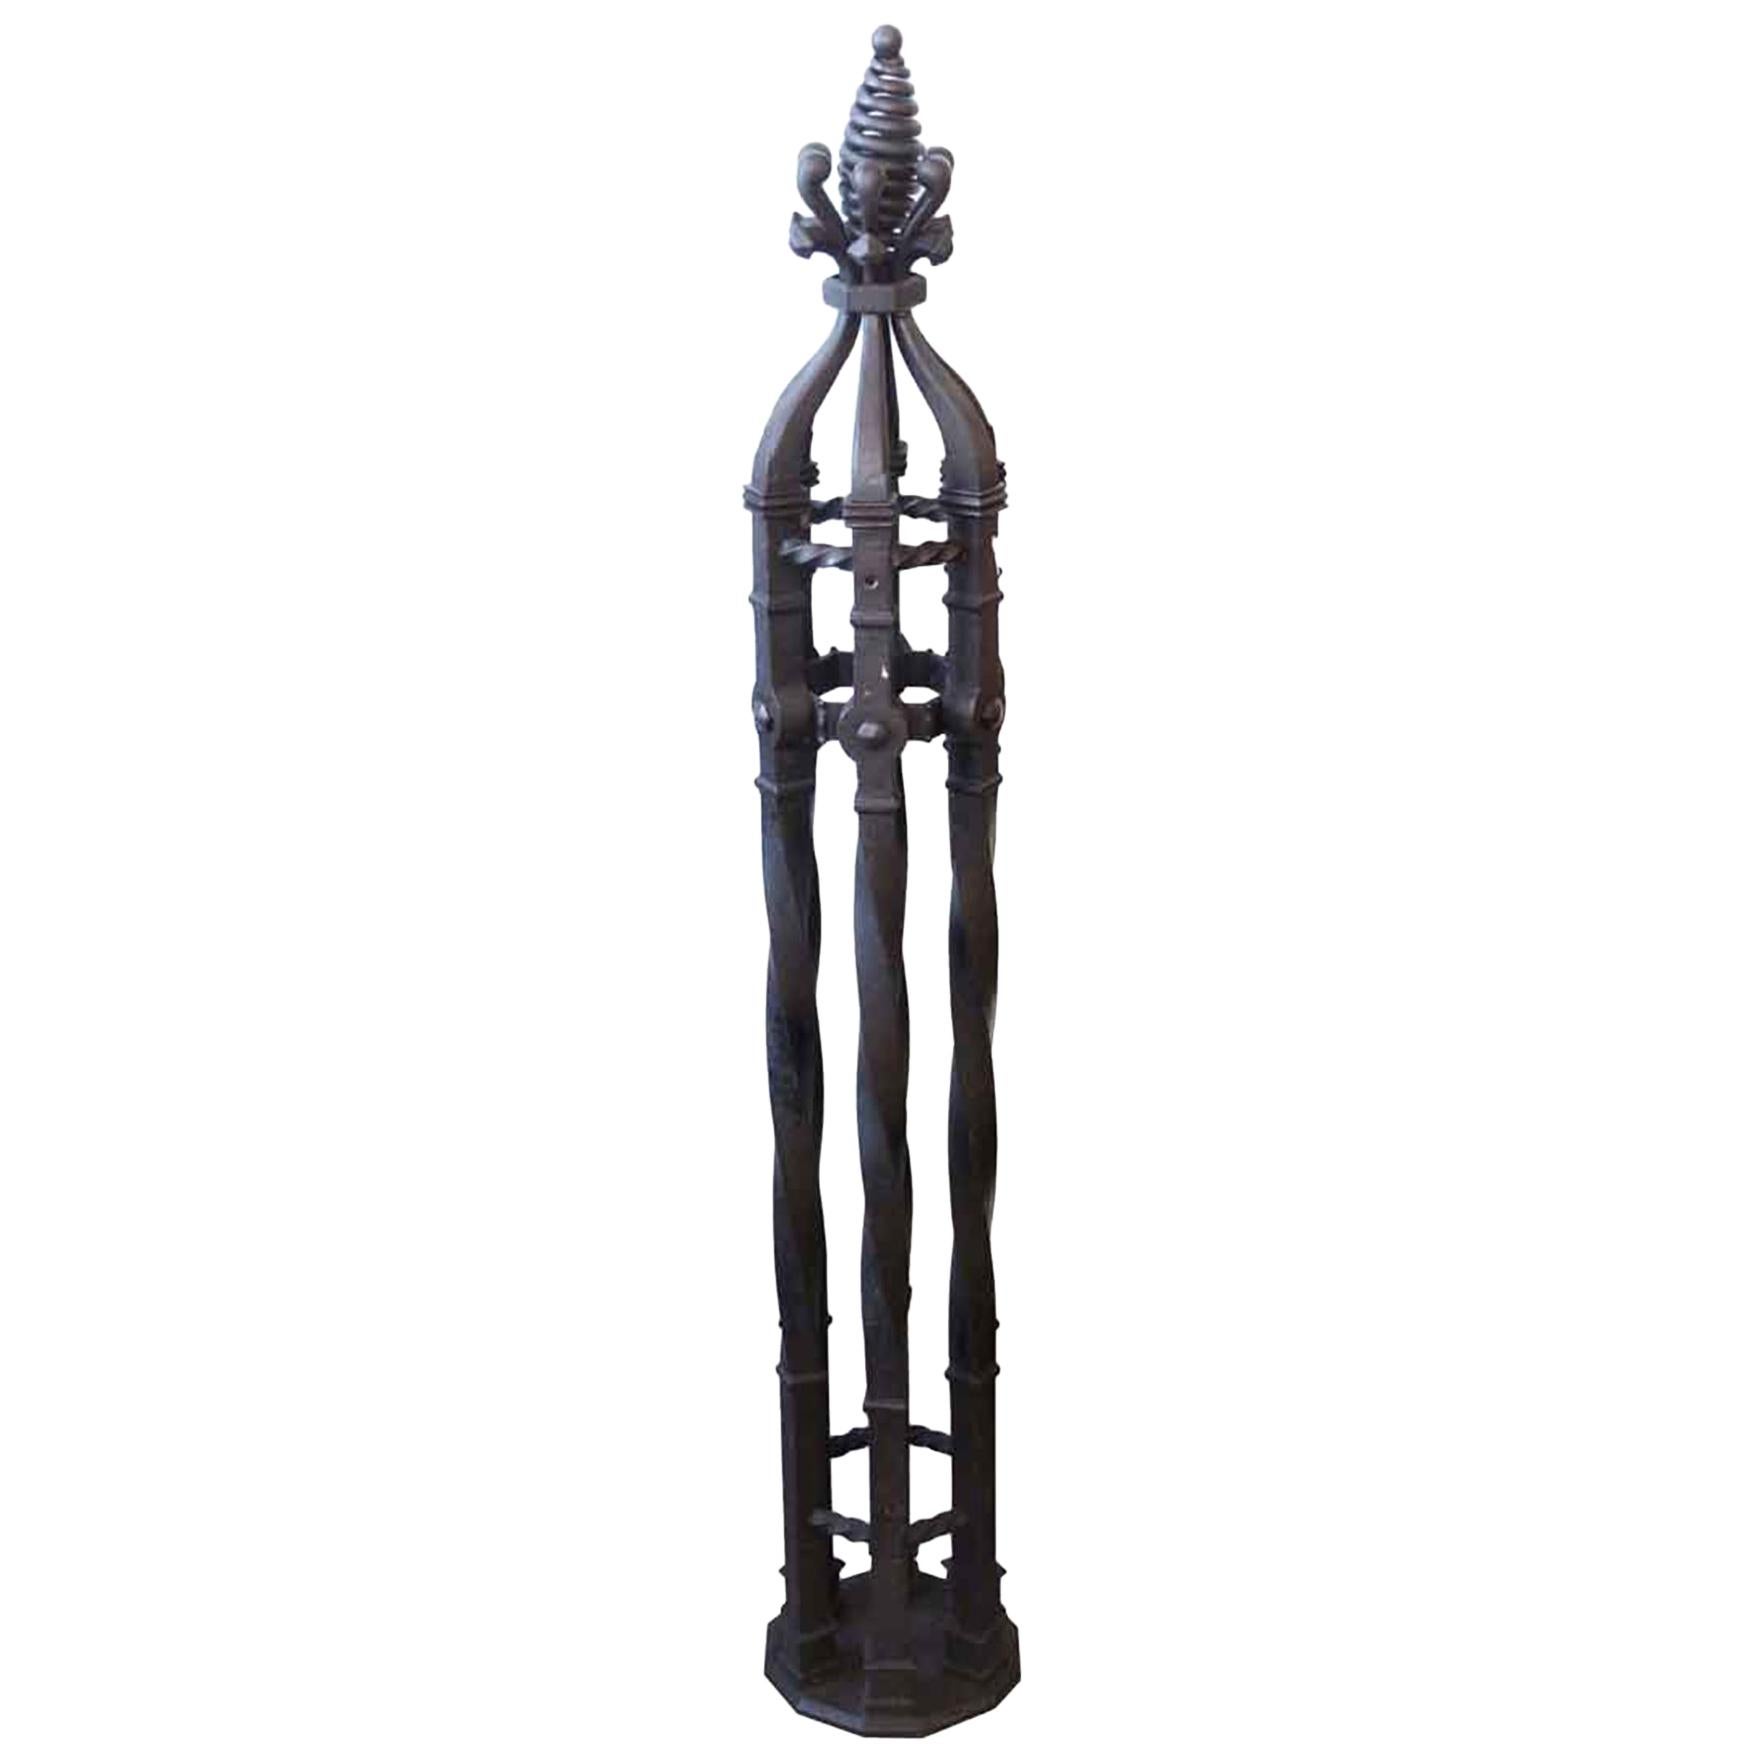 1890s Wrought Iron Stair Railing Post with Twisting